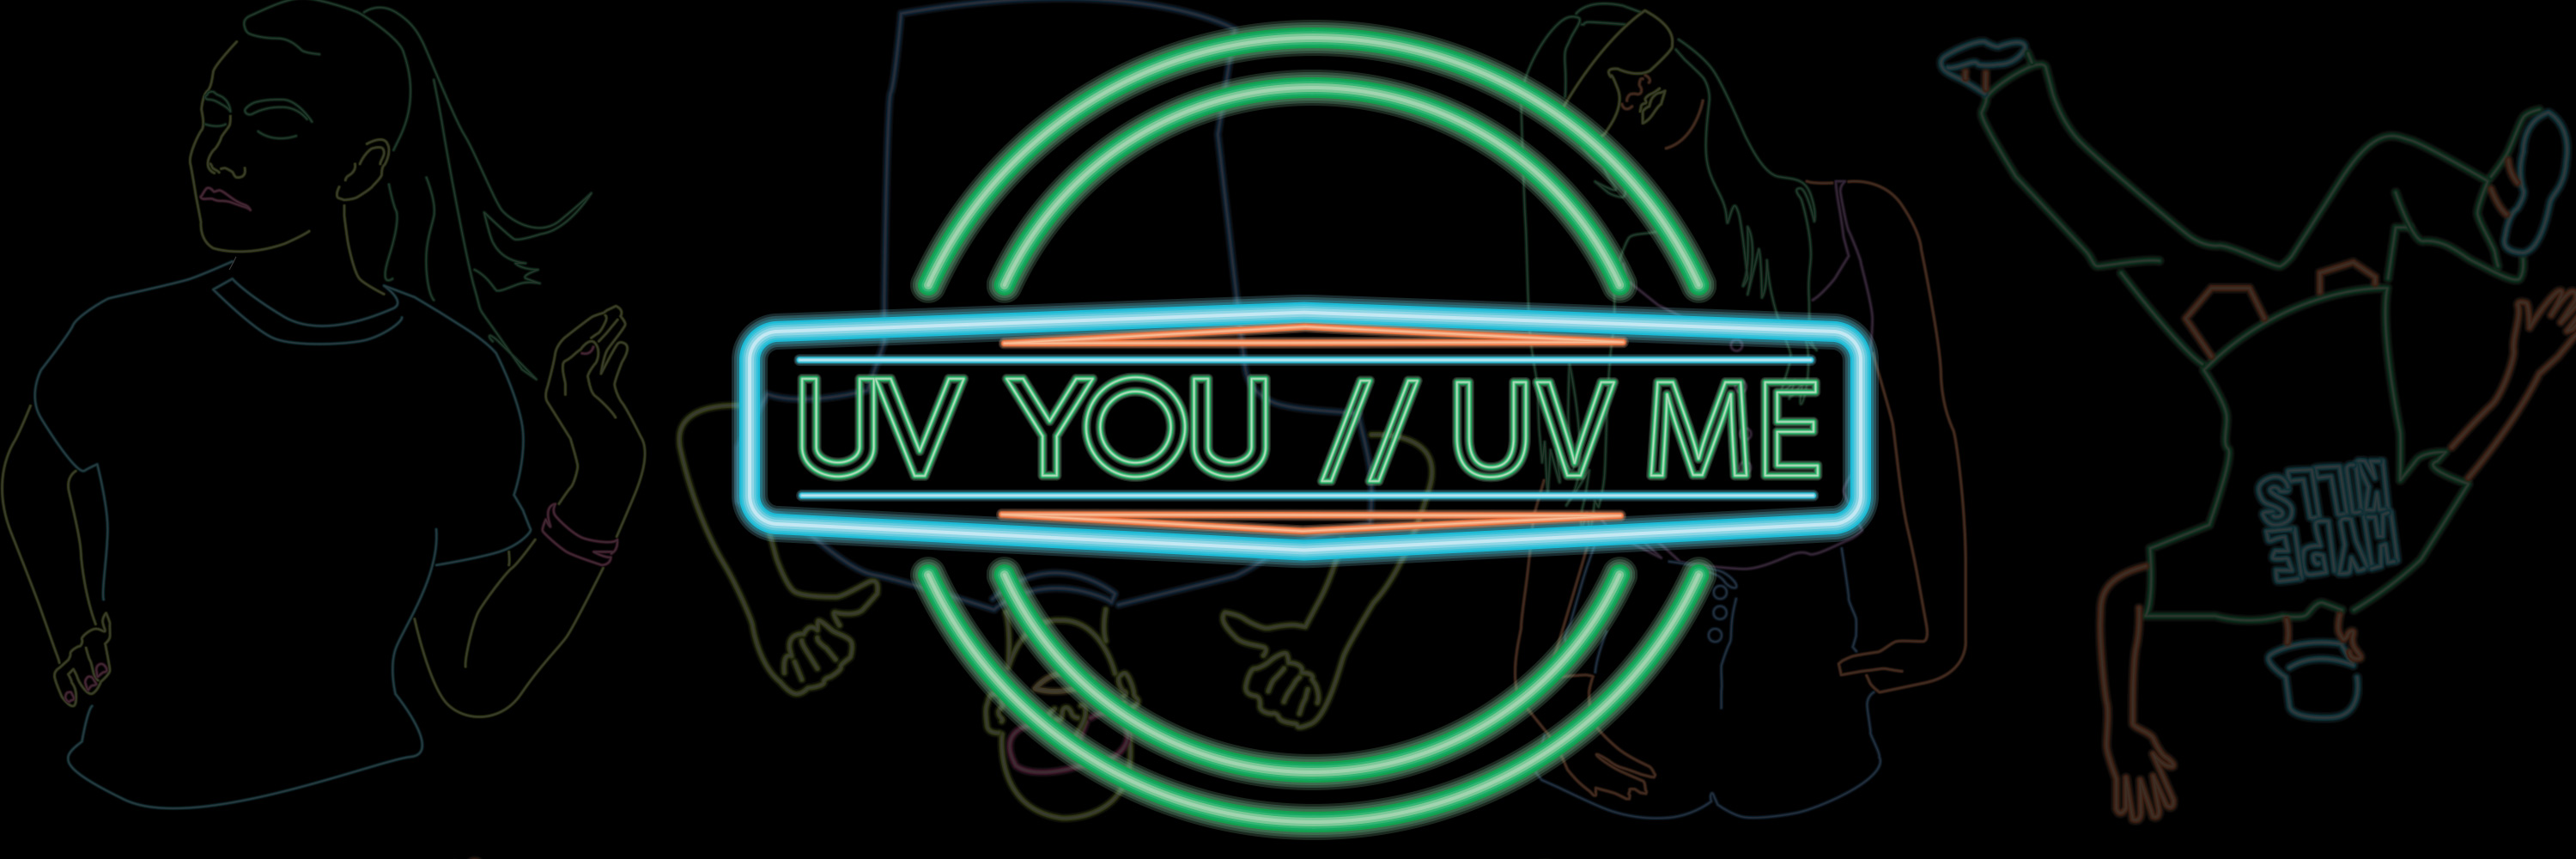 A banner graphic designed to look like a neon sign with the words UV you UV Me